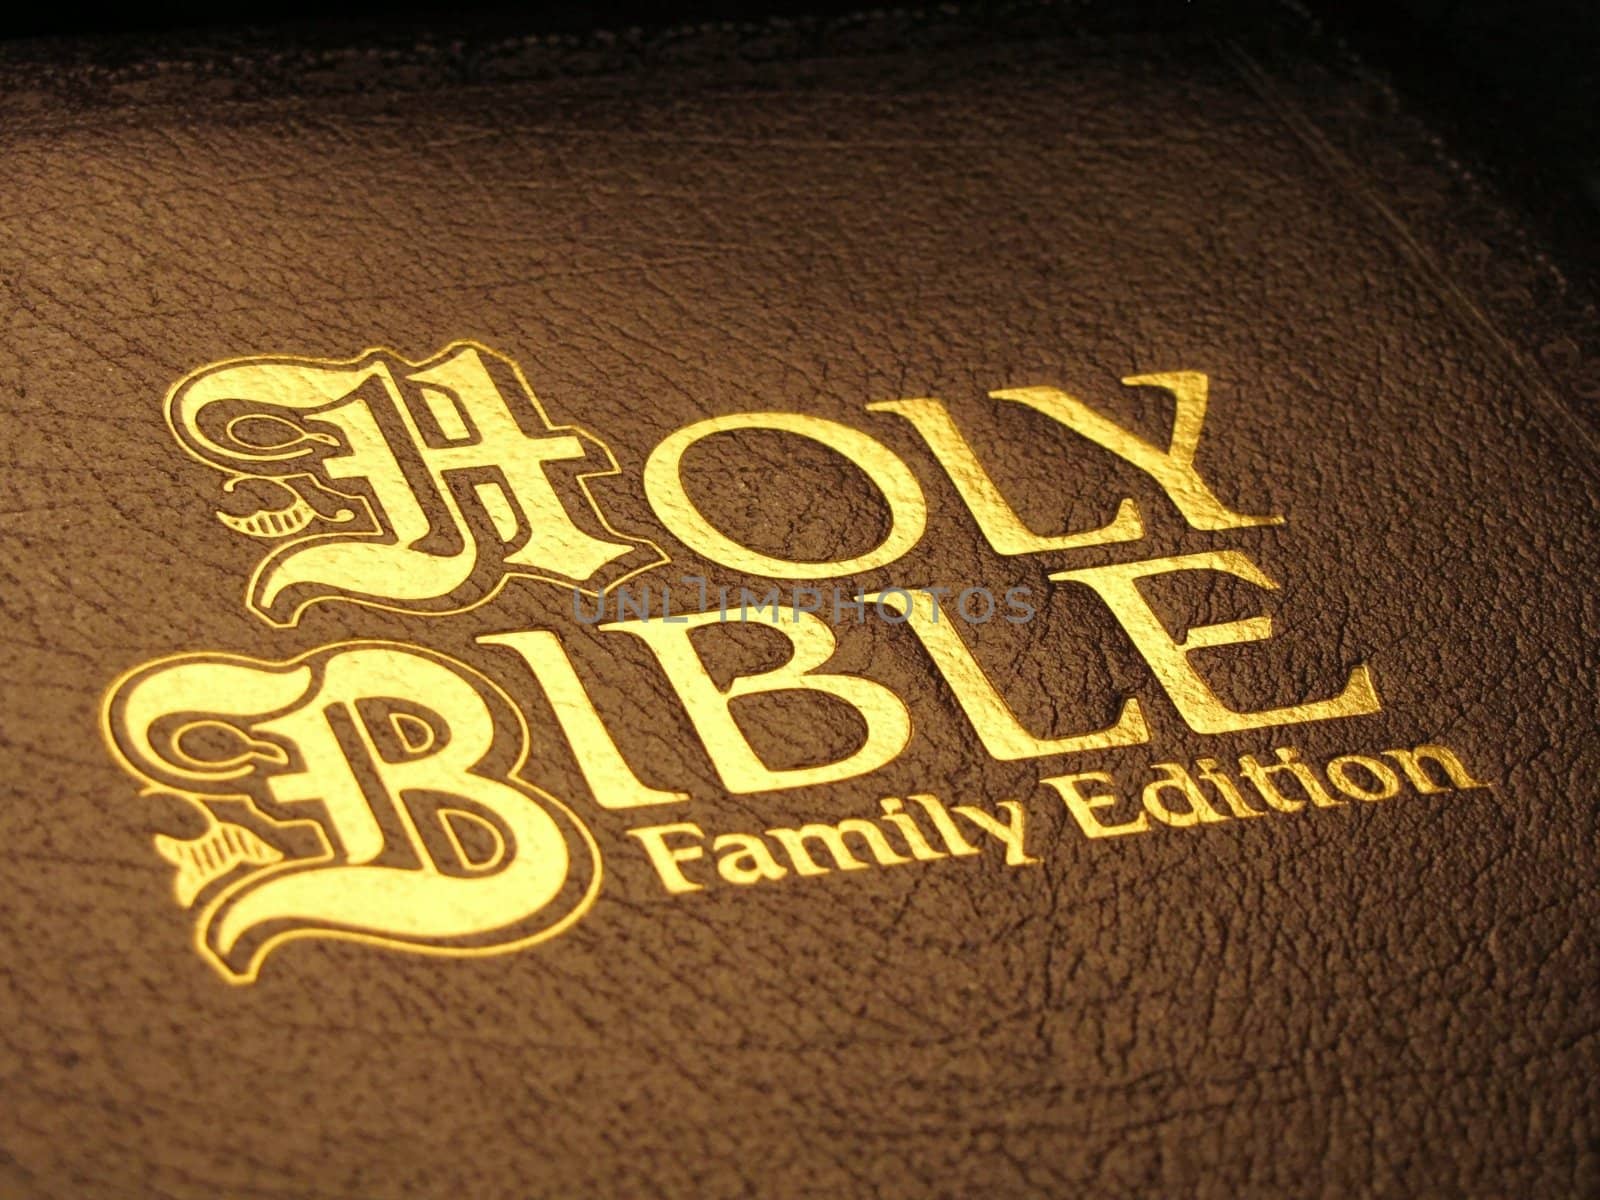 Holy Bible Family Edition by darla1949